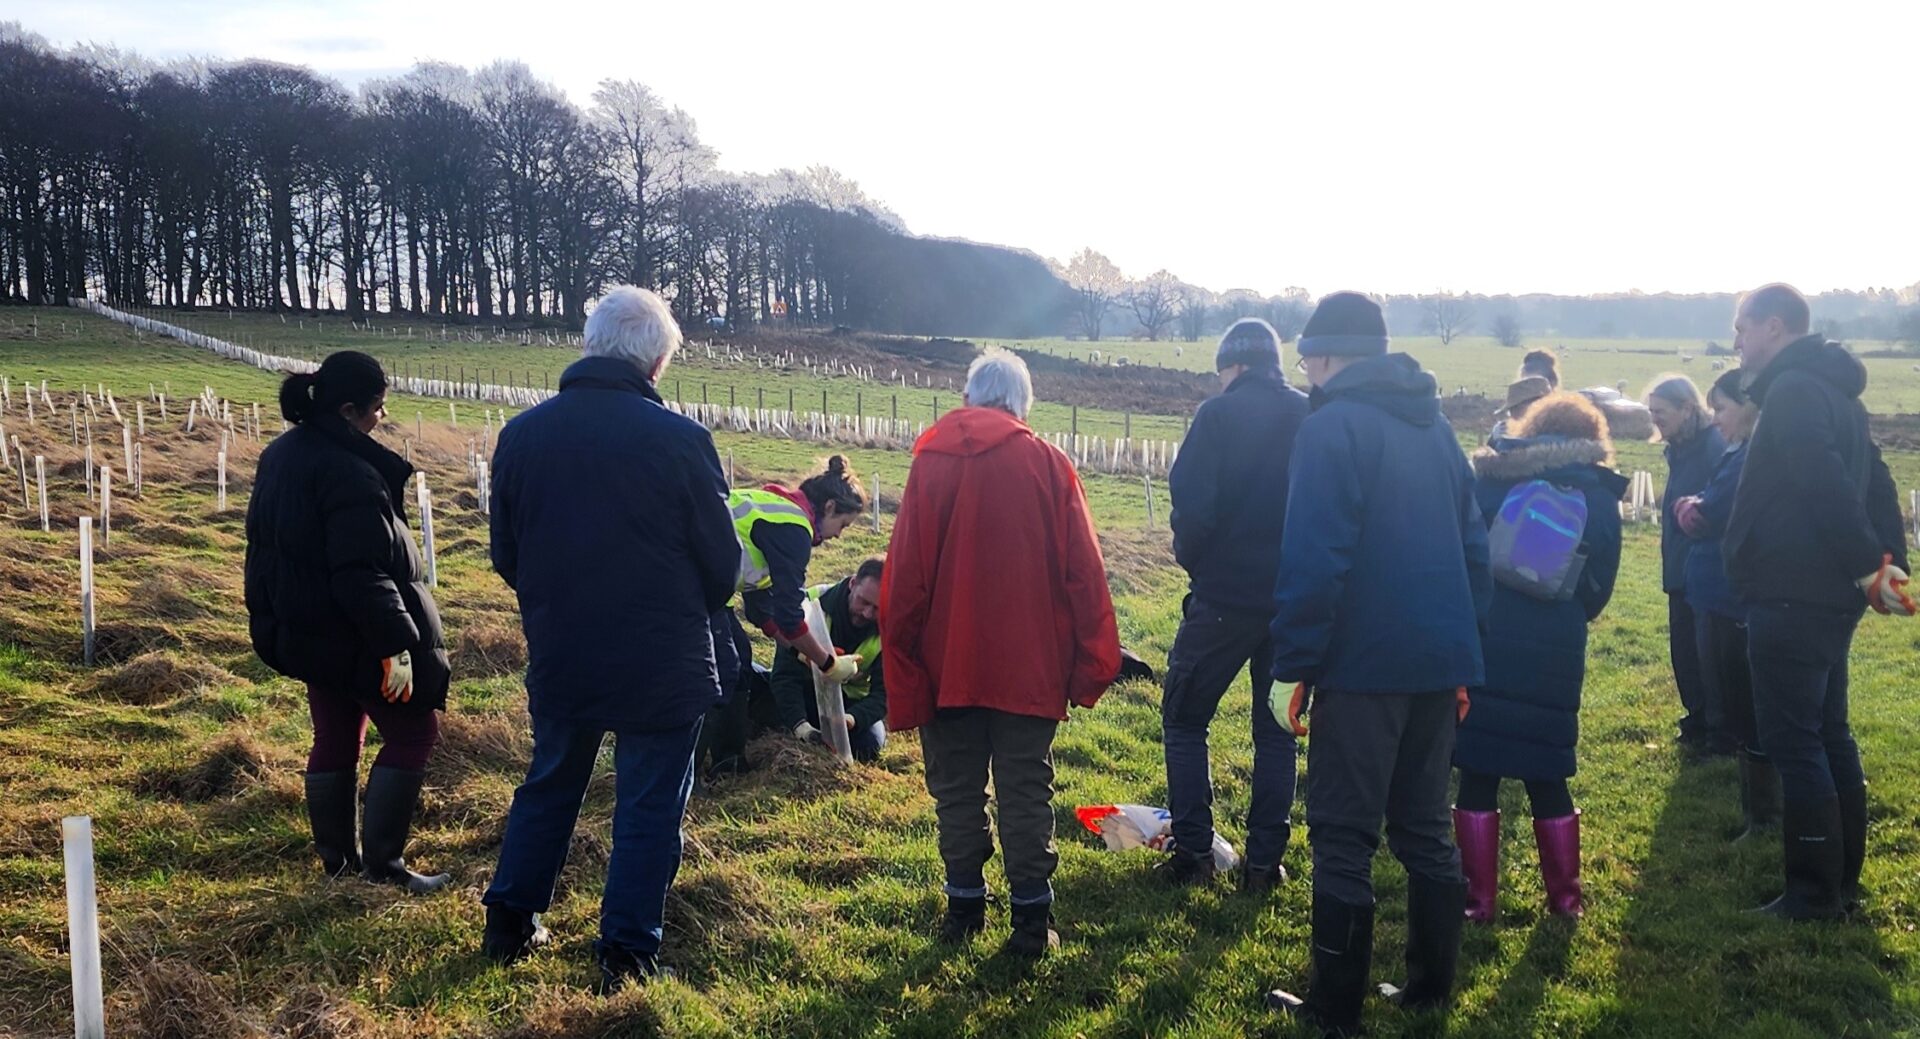 A group of people gathered around Drs Tom Sloan and Cat Scott, who are demonstrating how plastic guards should fit around tree seedlings